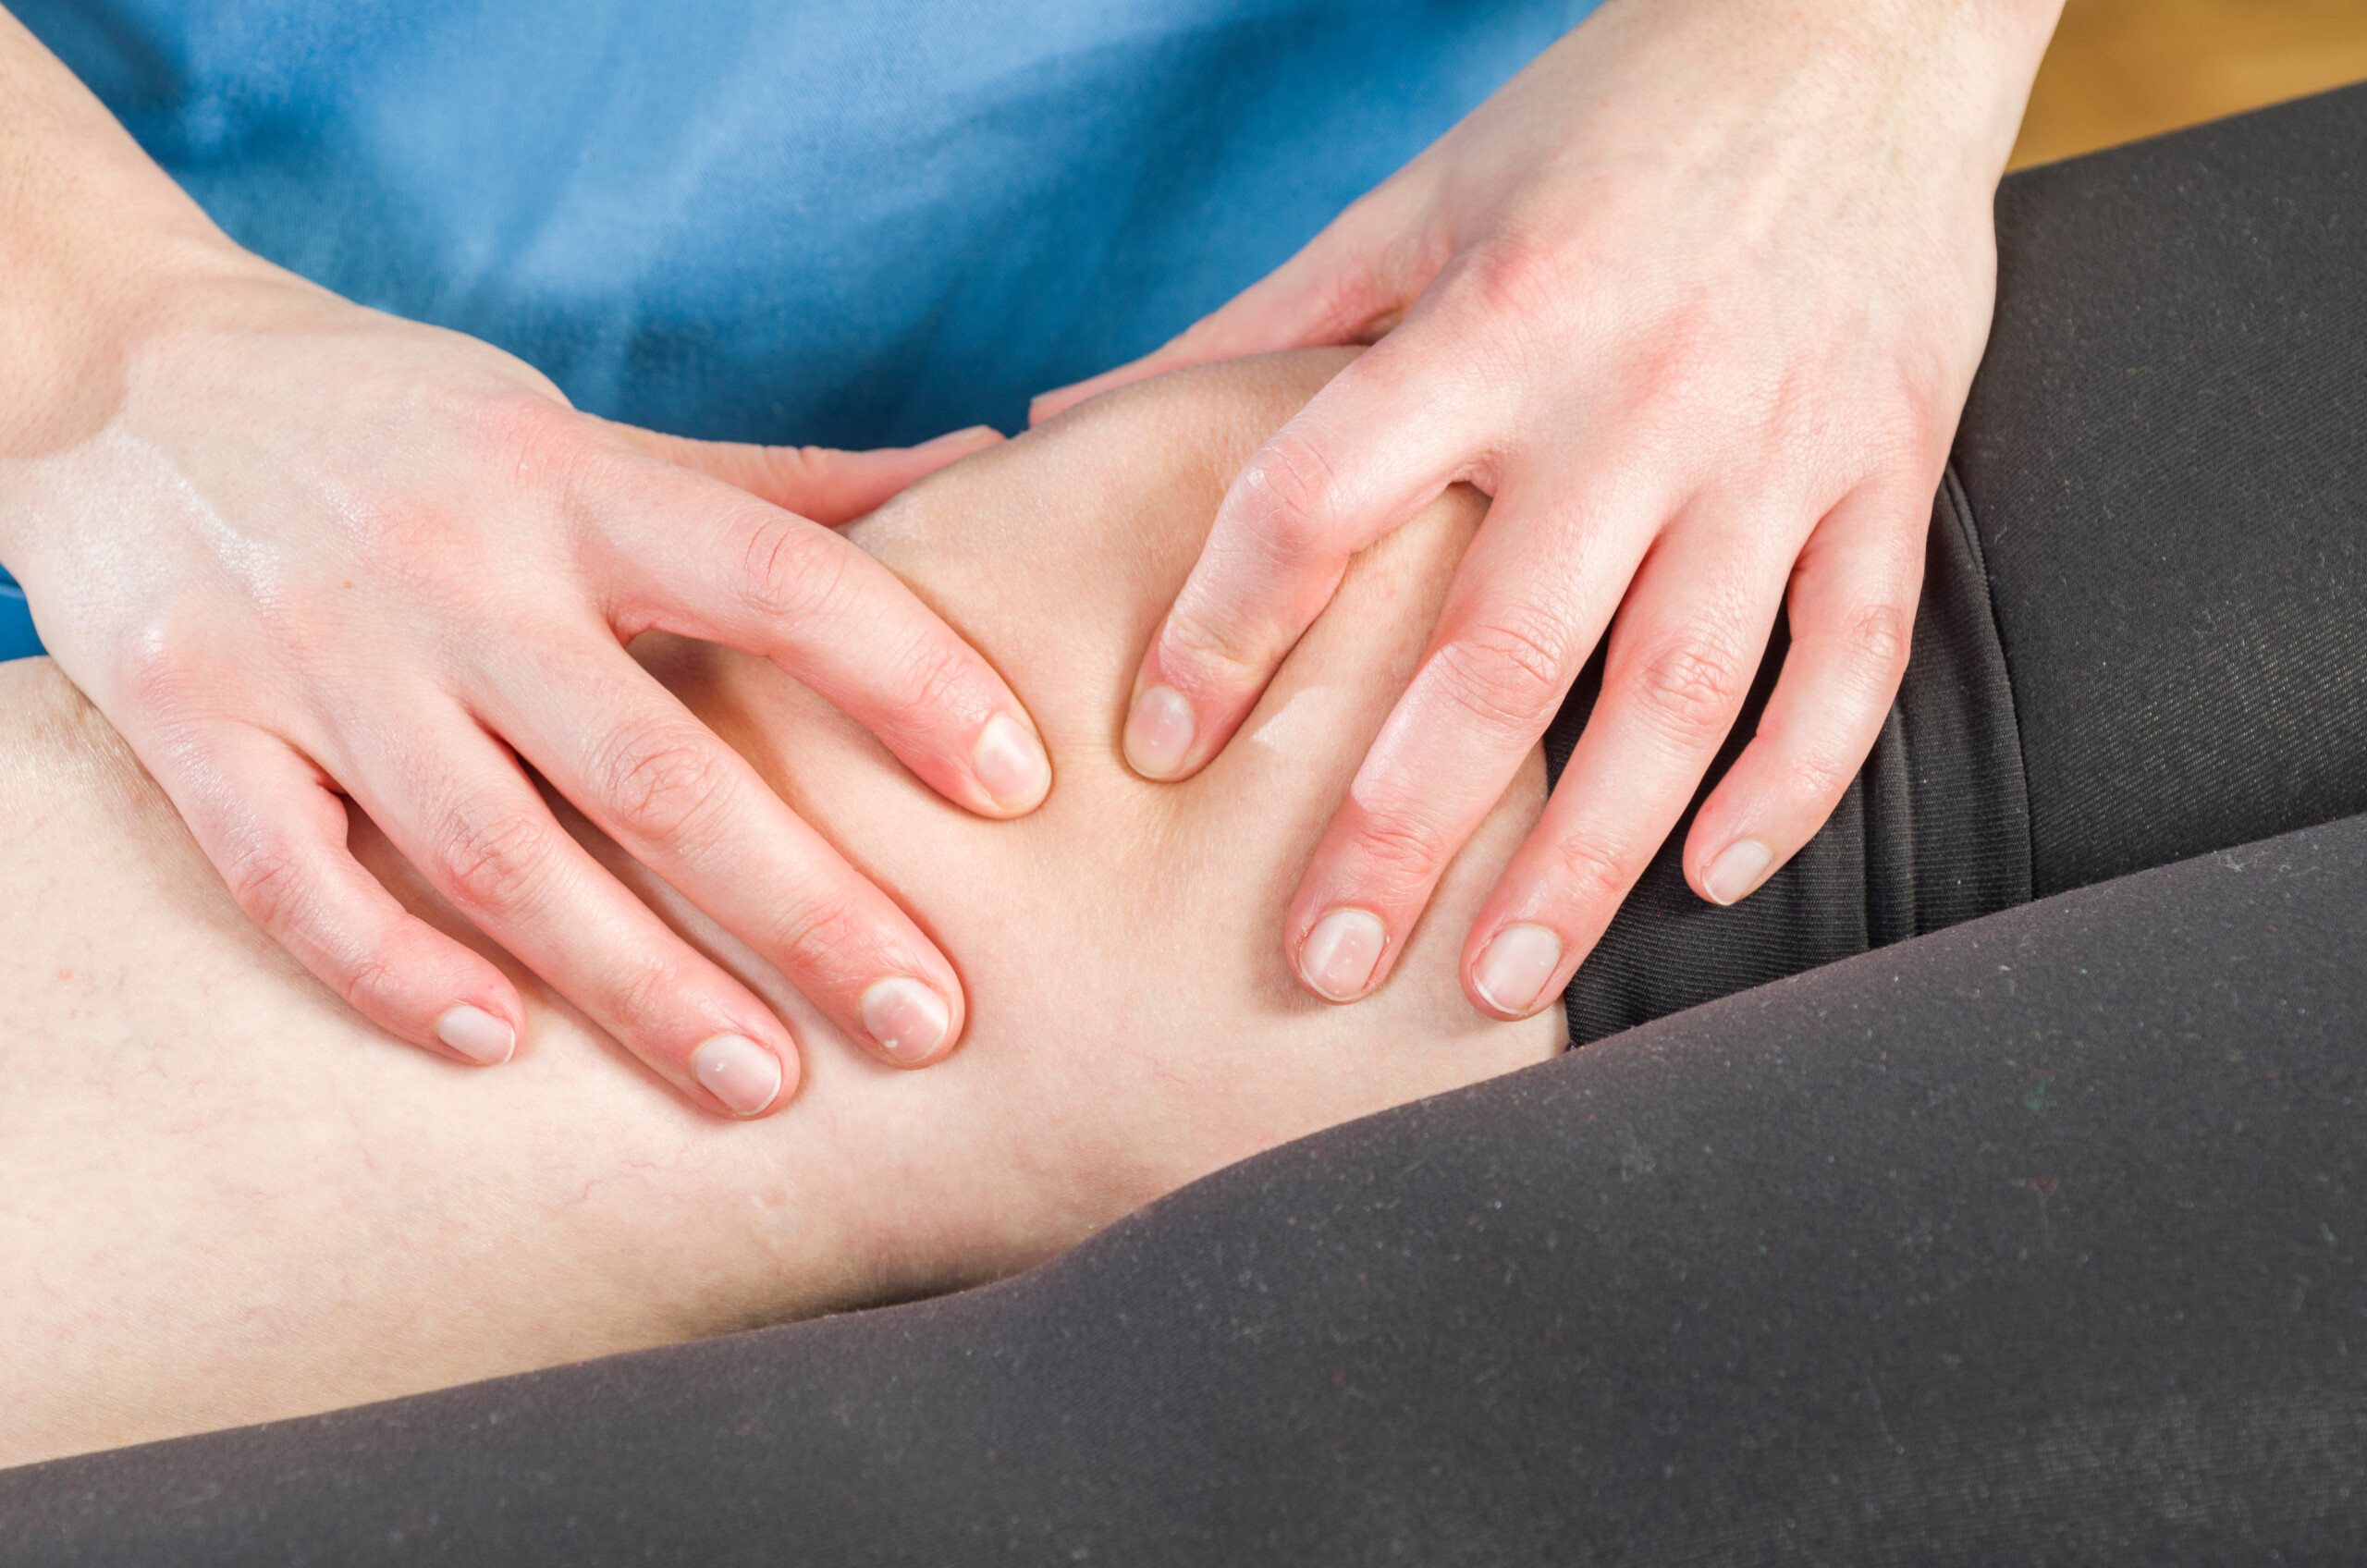 Signs and Symptoms of Possible Torn Ligaments in Your Knees